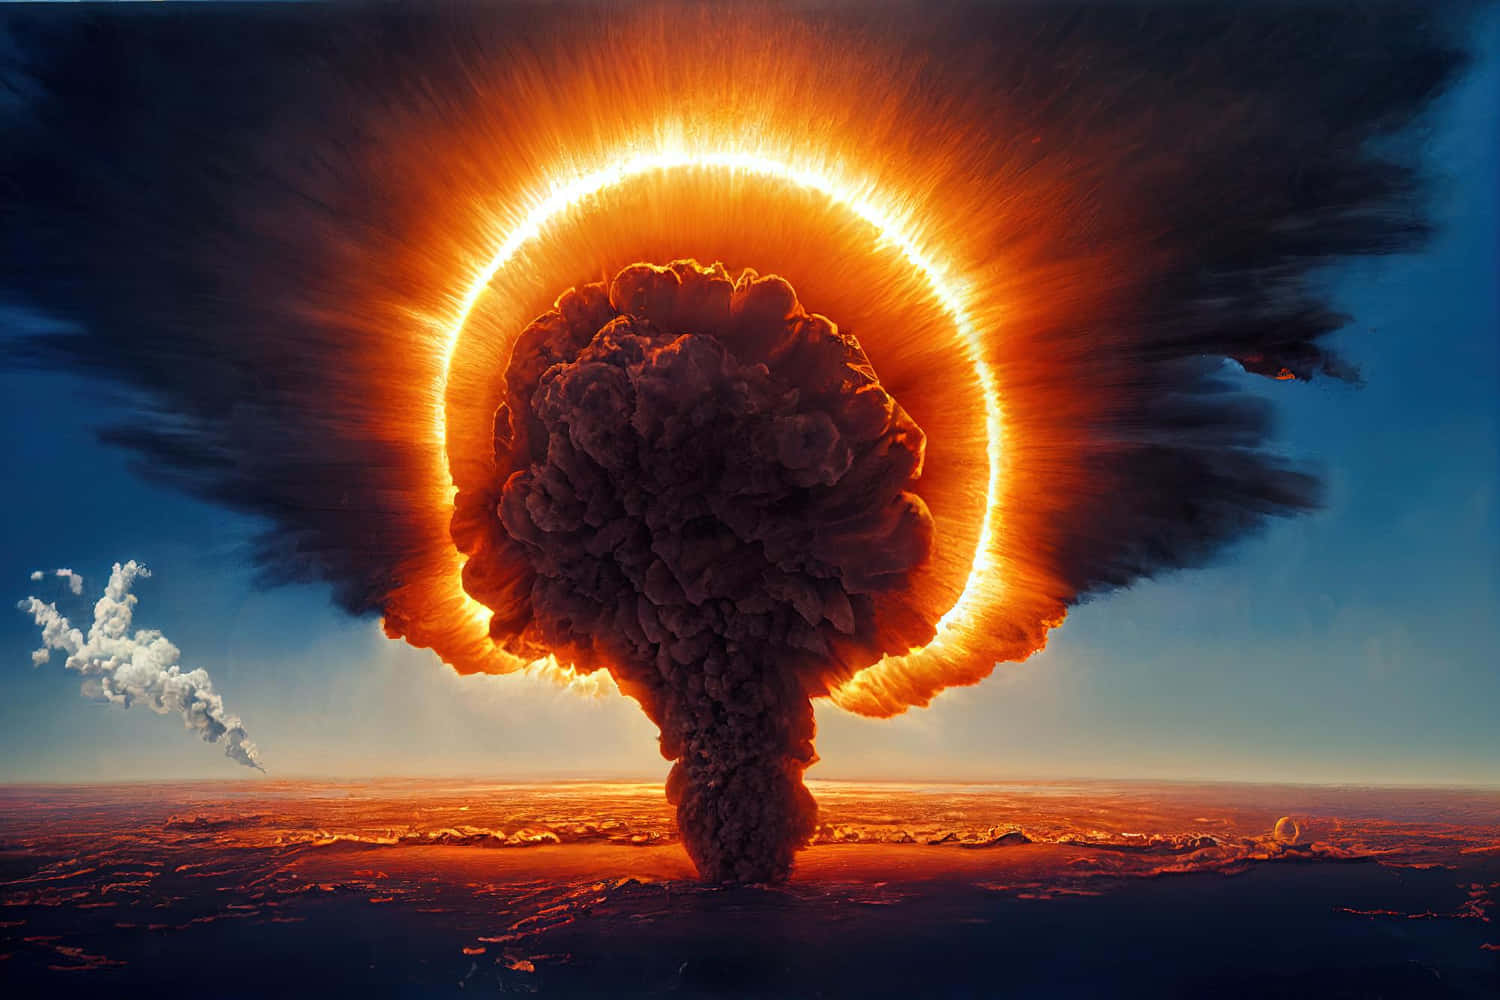 Majestic_ Nuclear_ Explosion_ At_ Sunset.jpg Wallpaper